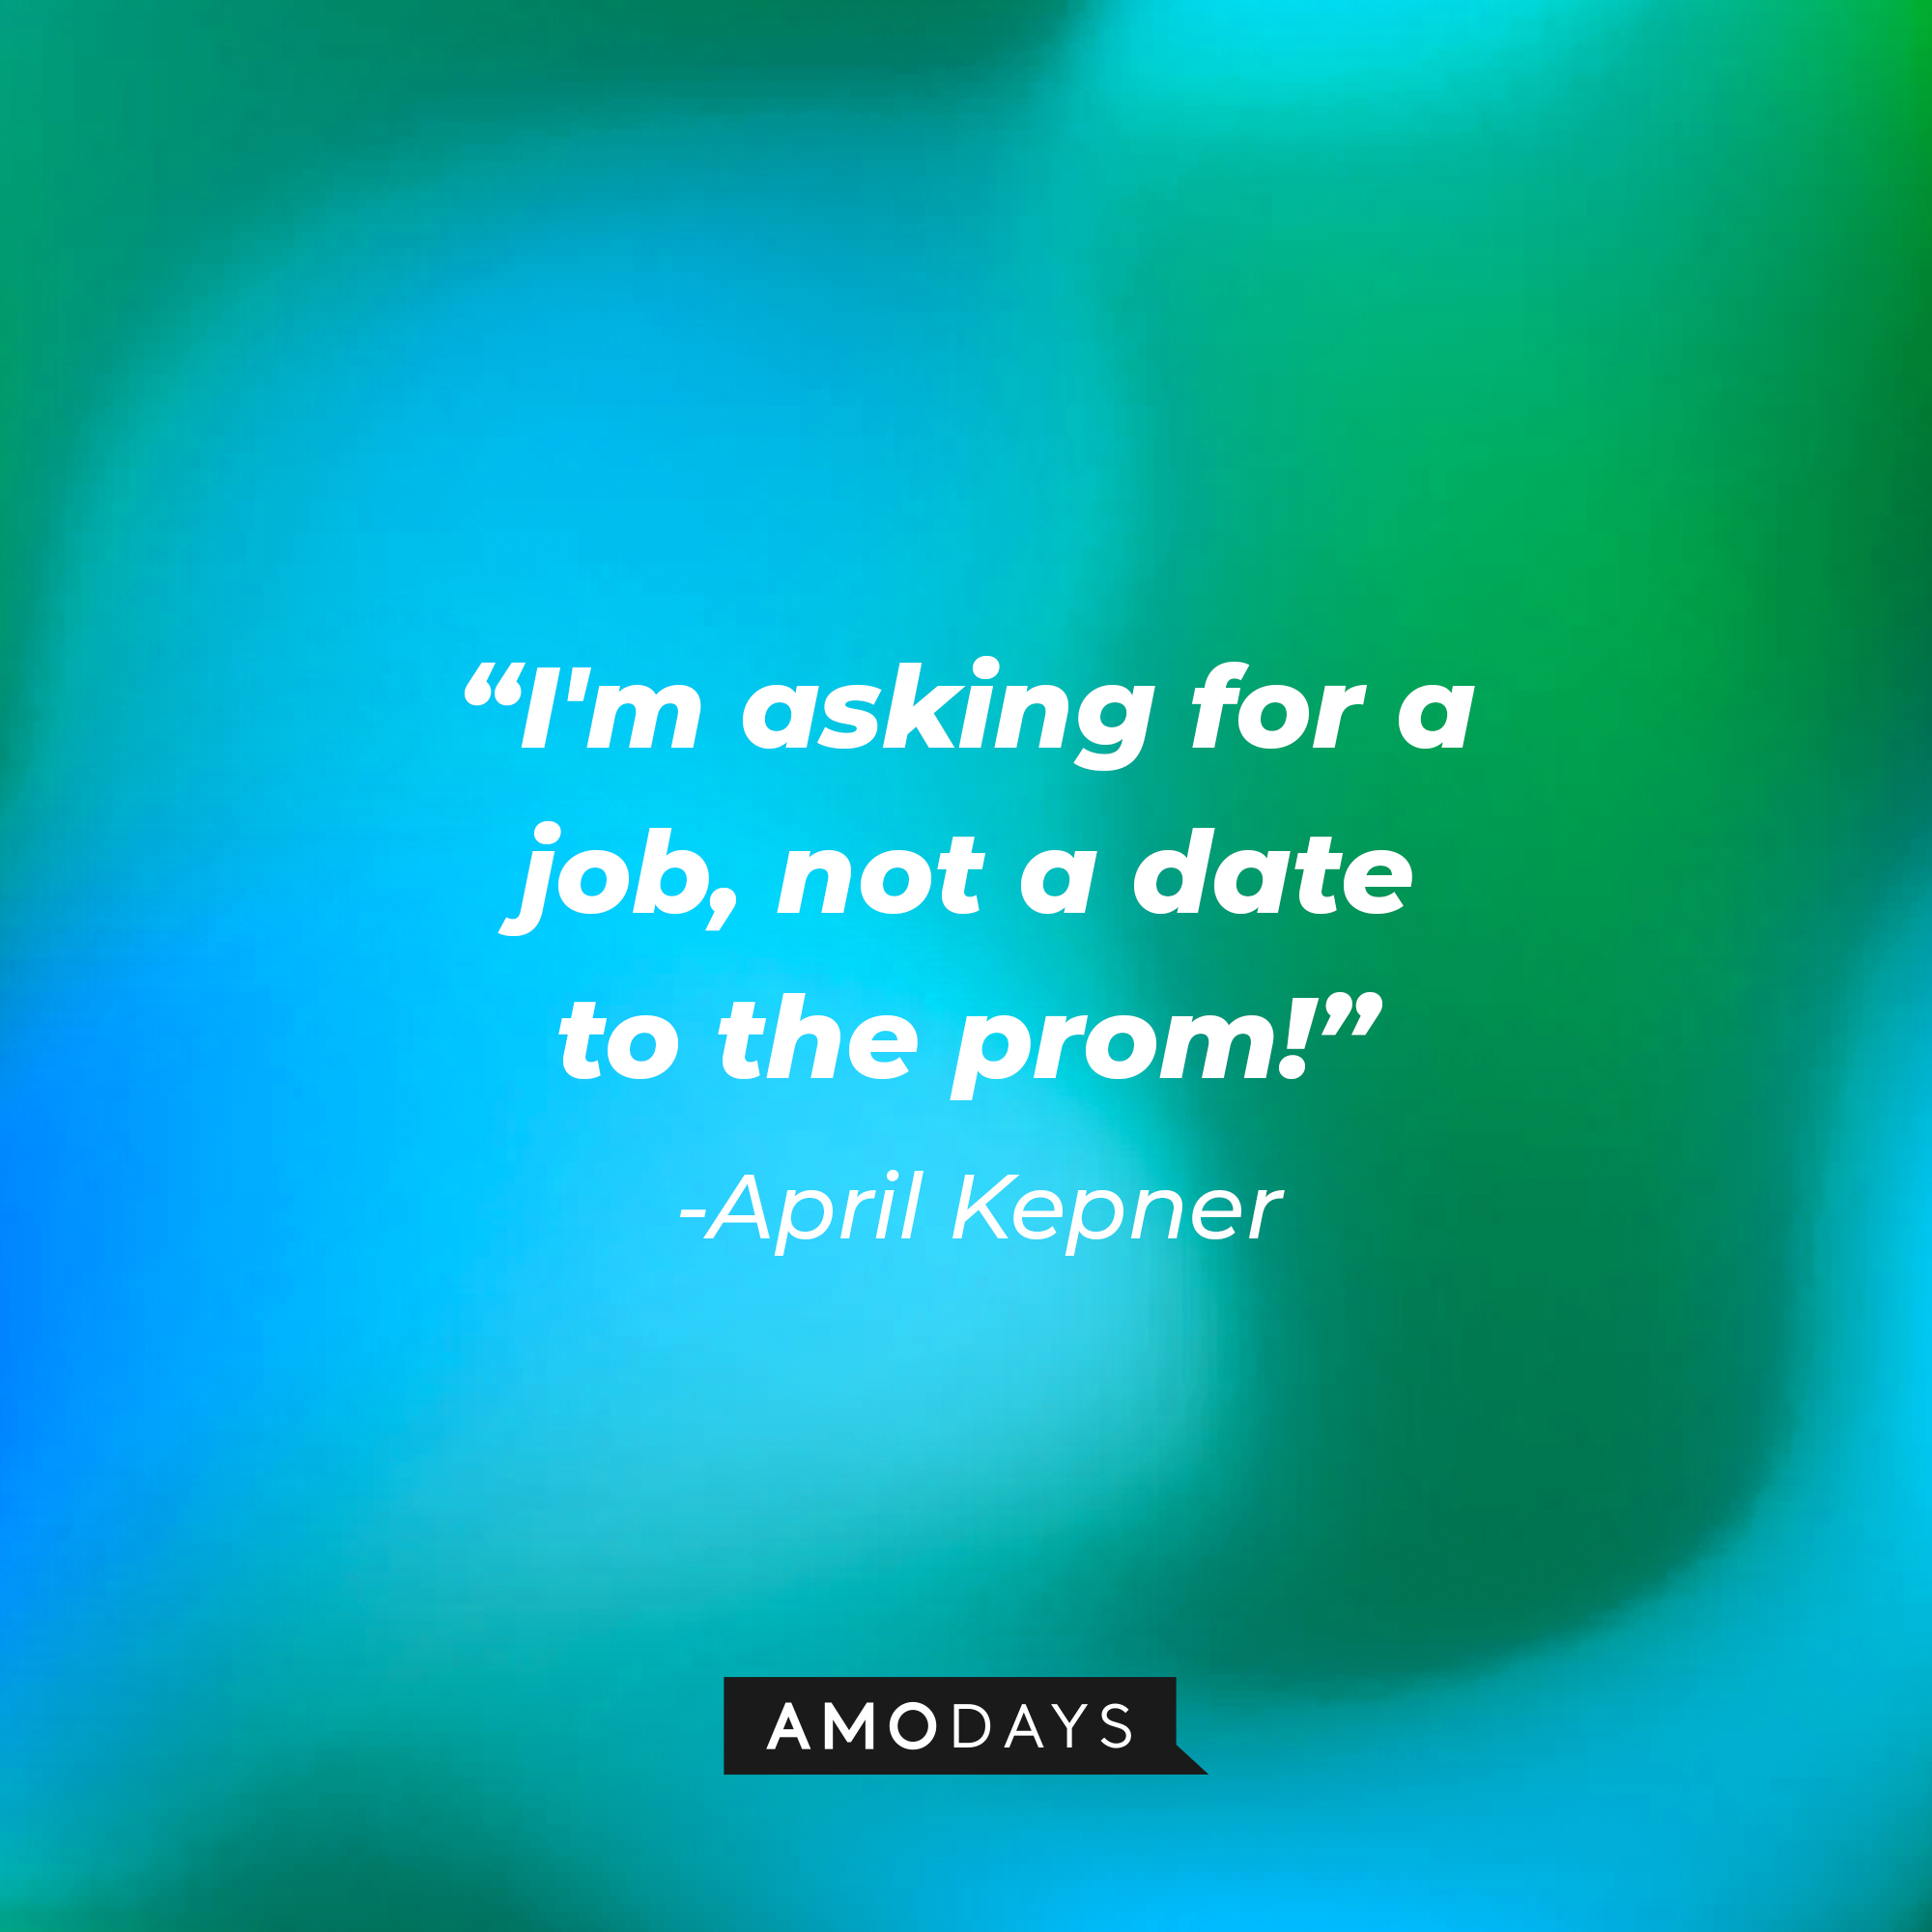 April Kepner's quote: "I'm asking for a job, not a date to the prom!" | Source: AmoDays